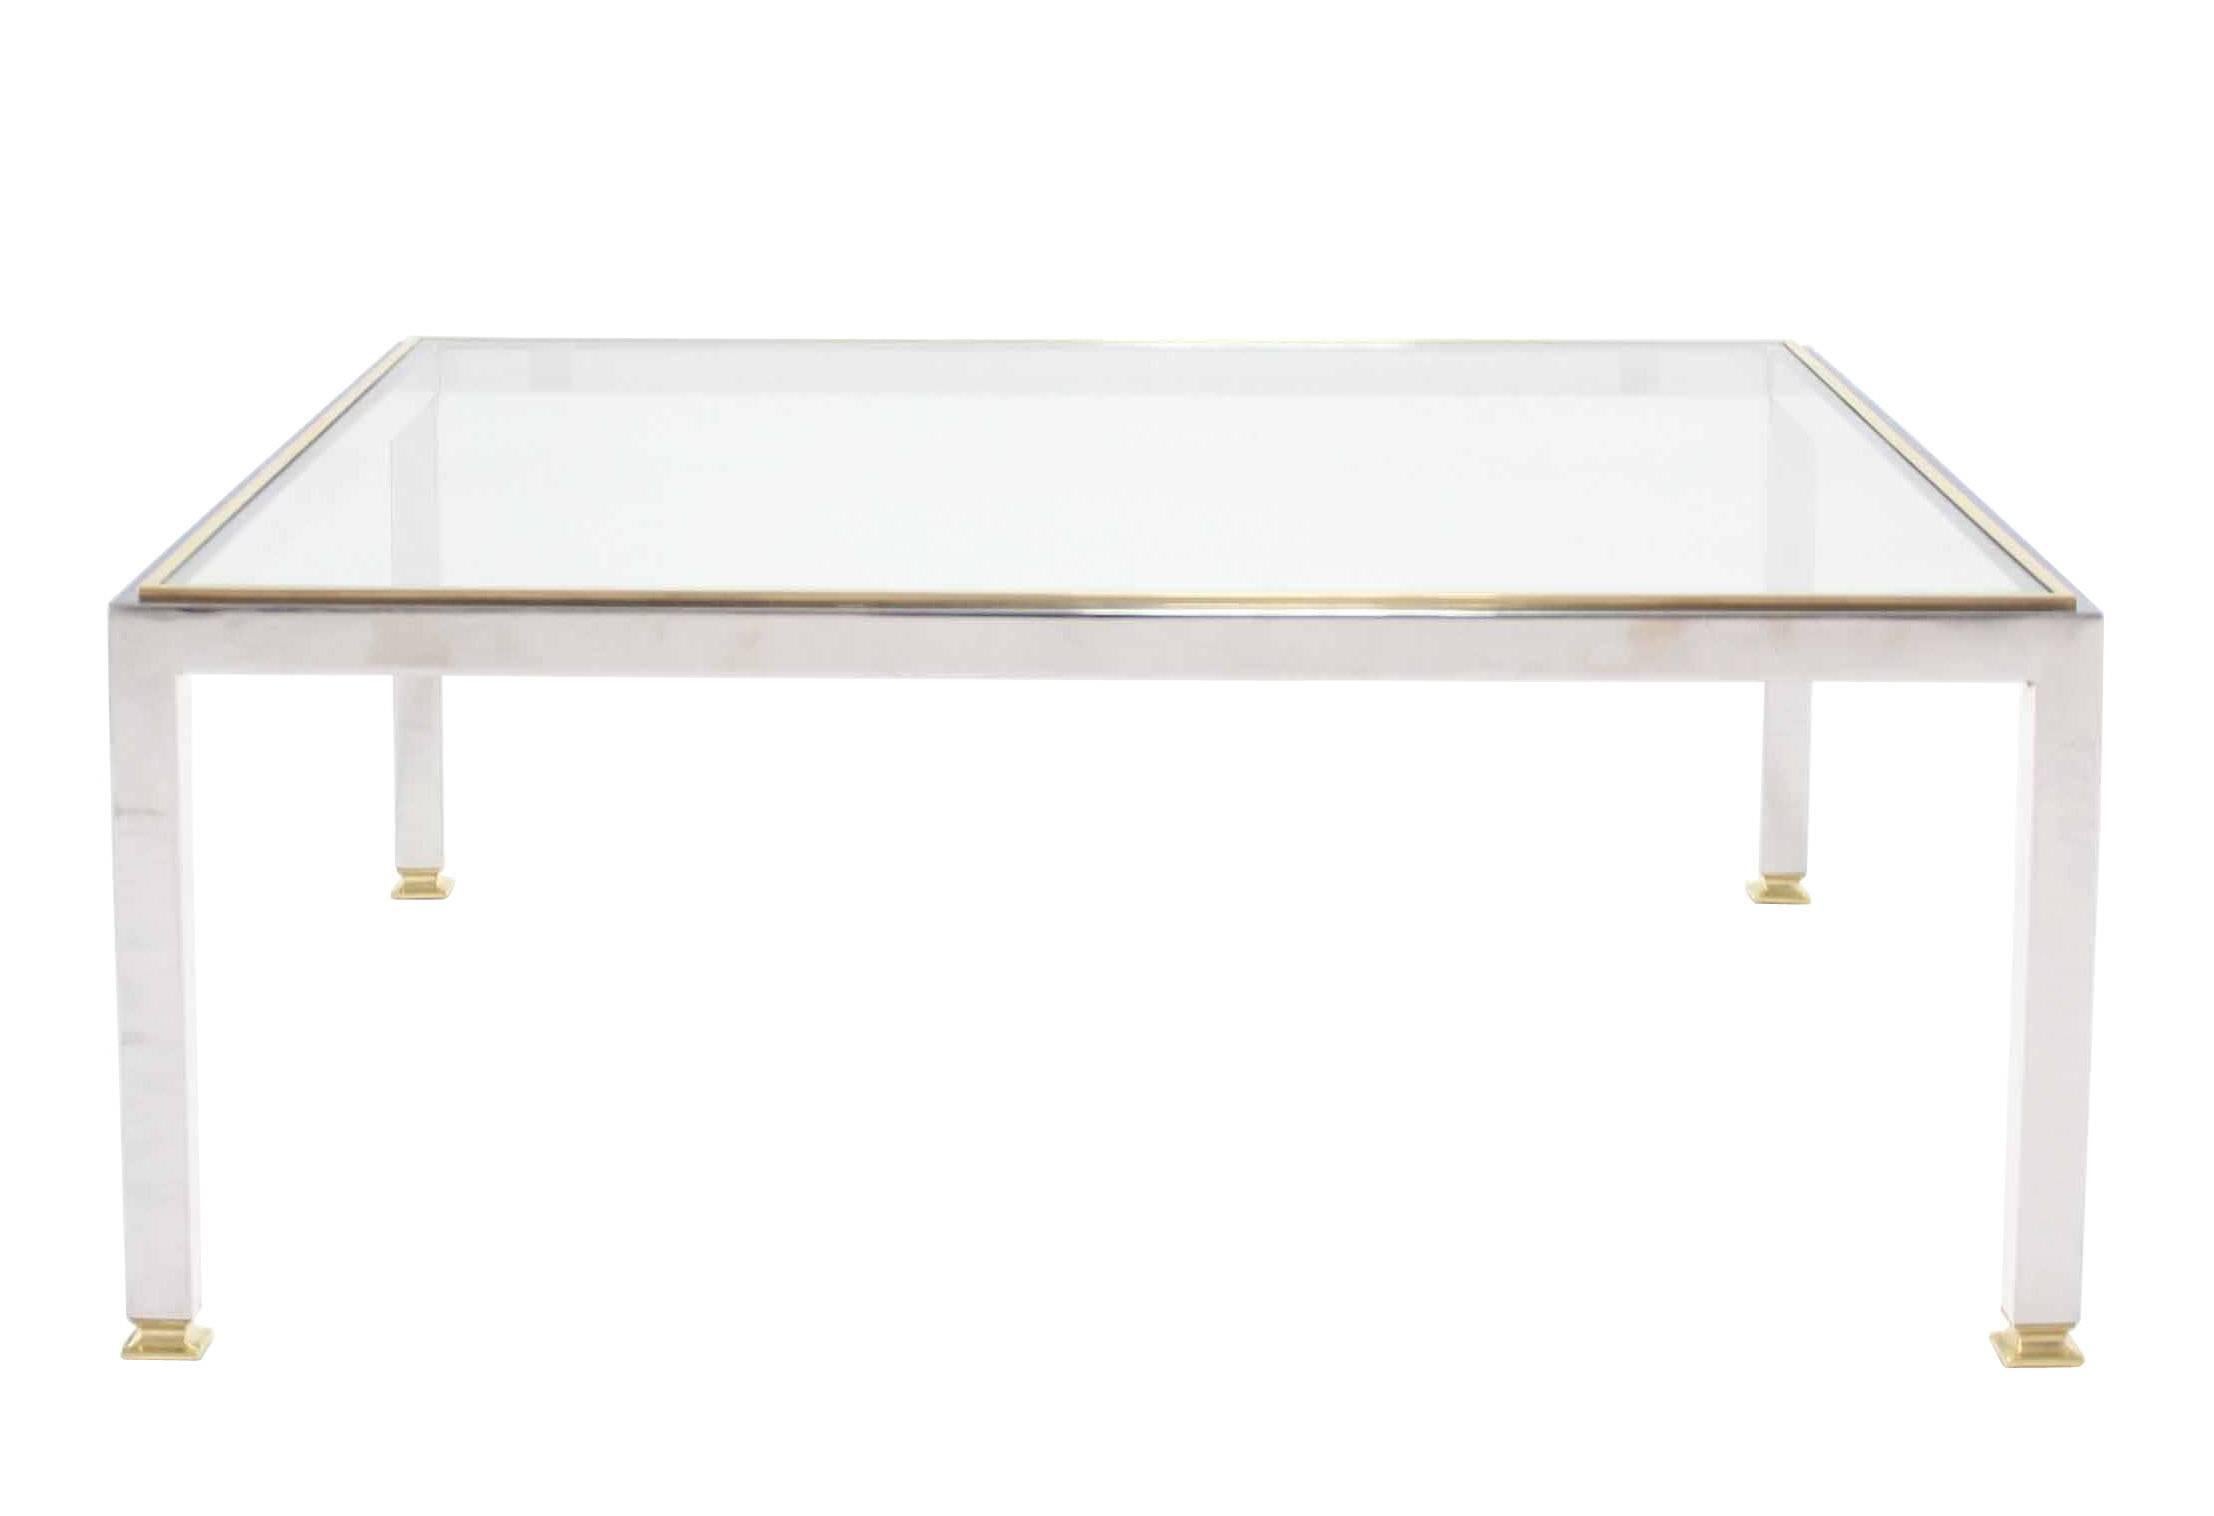 Large Square Chrome and Brass Mid-Century Modern Coffee Table In Excellent Condition For Sale In Rockaway, NJ